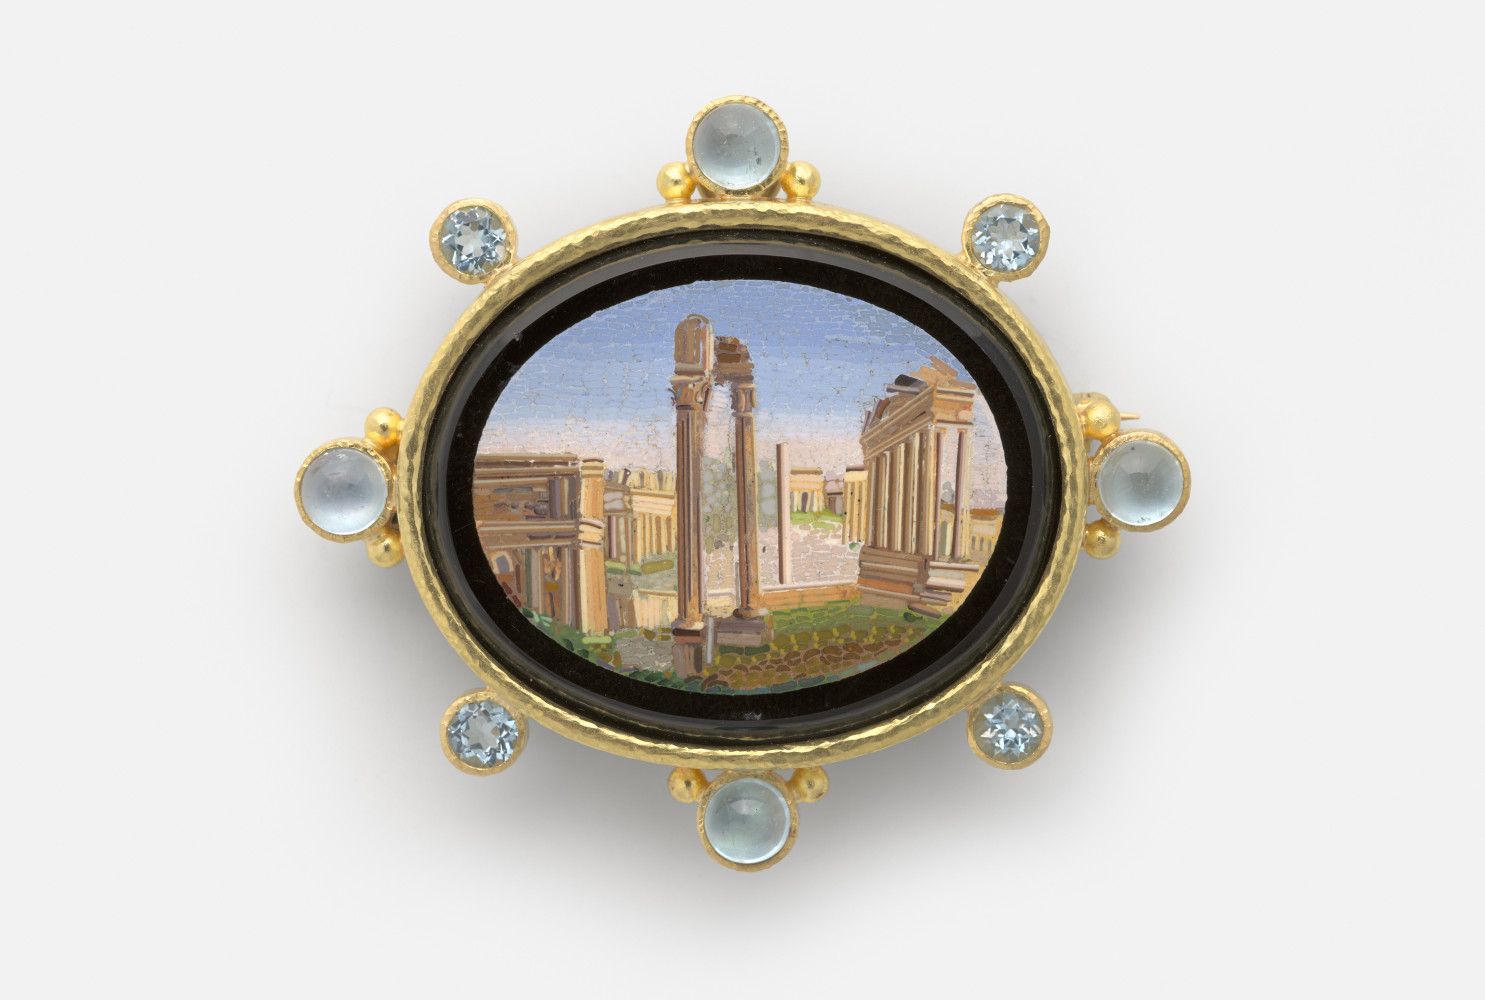 Roman Forum, Rome, 19th century; Micromosaic set in gold as a brooch, with alternating 6-mm cabochon aquamarines with side gold dots and 5-mm faceted aquamarines around bezel; 54 x 62 mm; Collection of Elizabeth Locke

Photo: Travis Fullerton, Virginia Museum of Fine Arts
